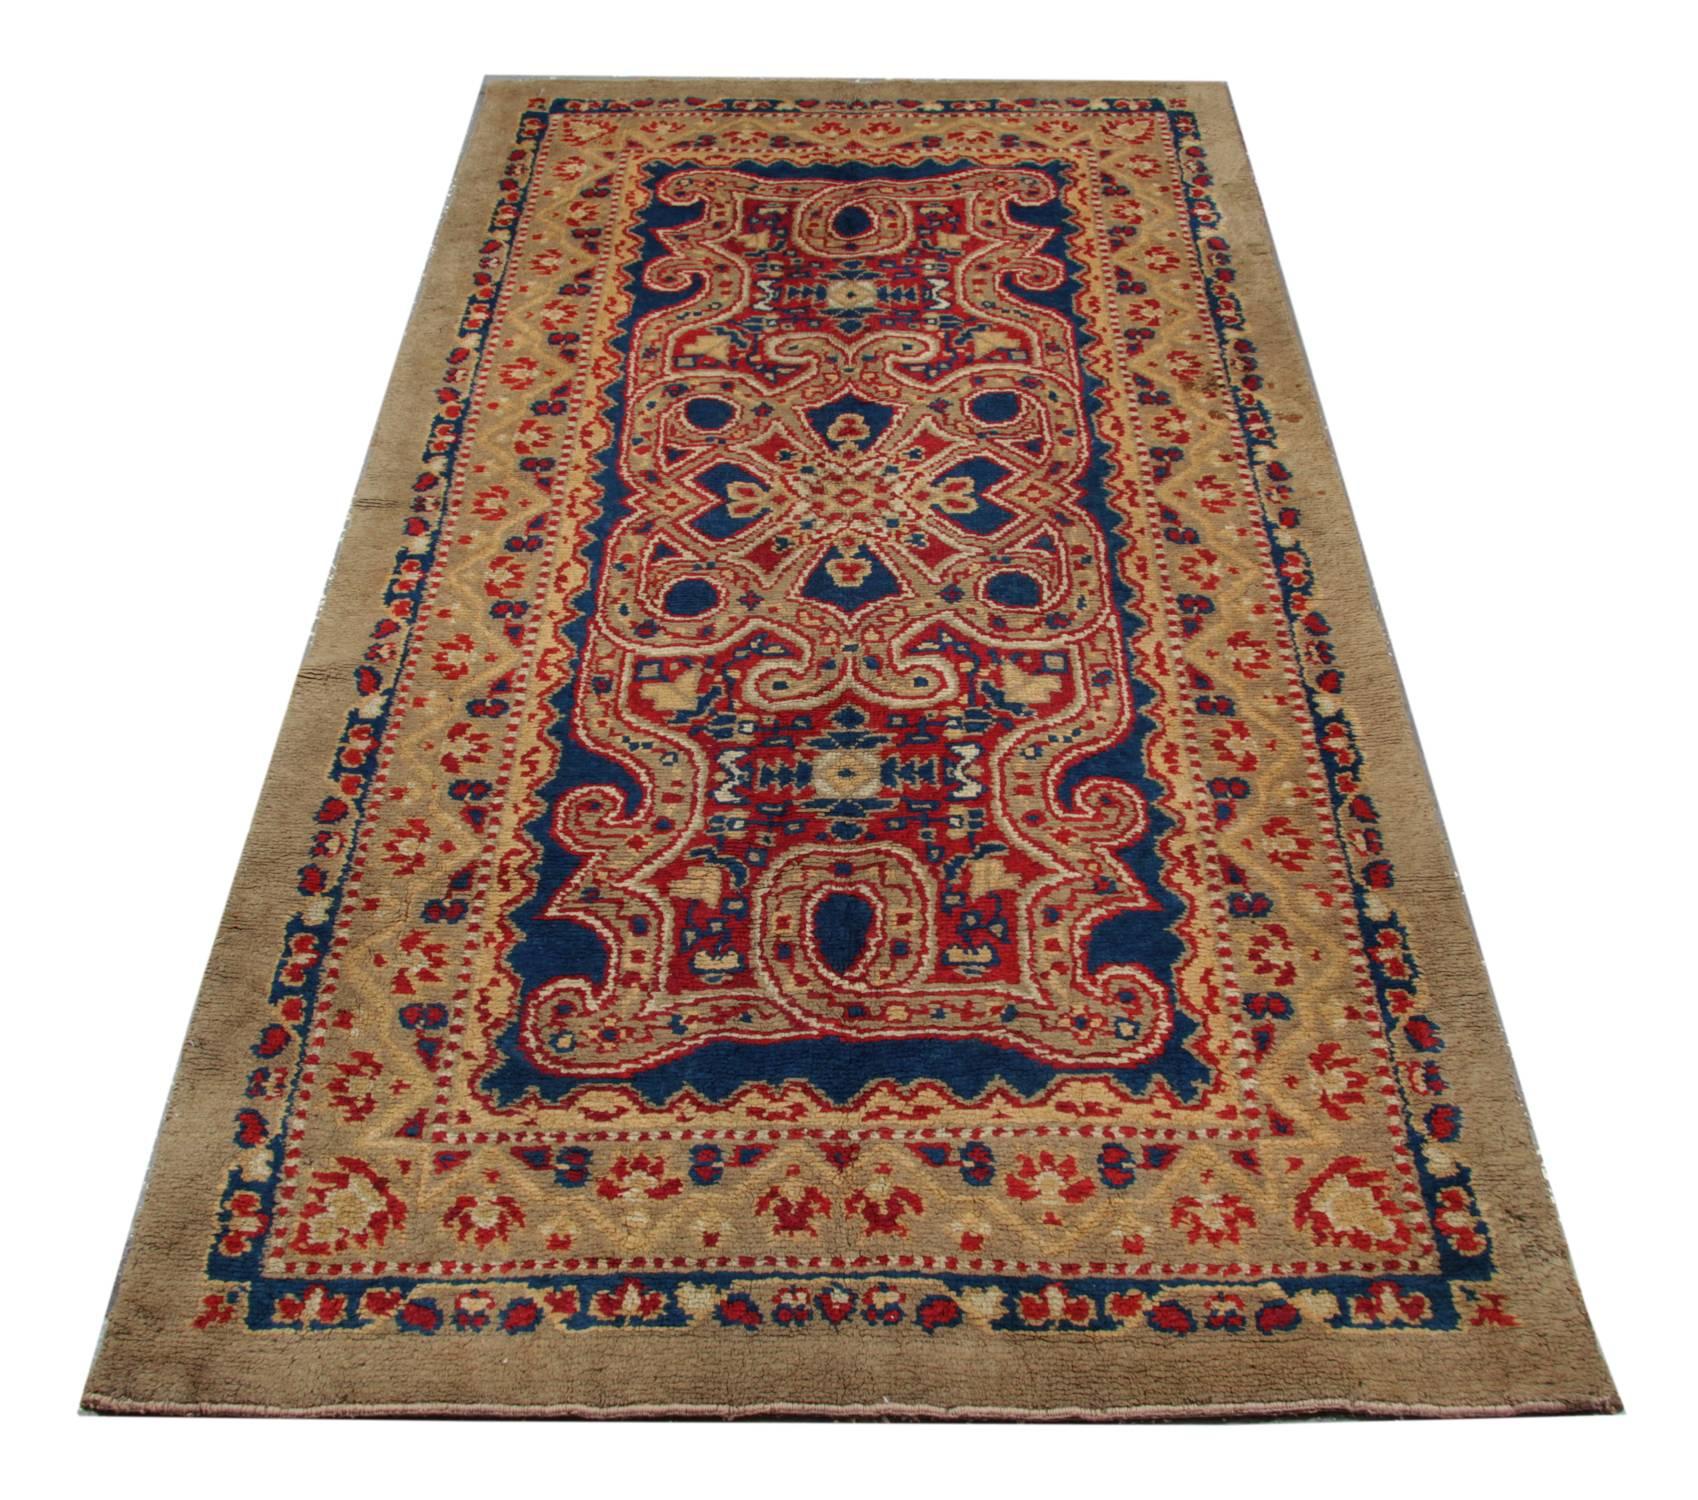 A woven rug English Axminster with a bold and elegant luxury rugs design in excellent condition.
These large living room rugs have a fascinating color combination which would go with classical or modern decor. This brown rug is kind of rugs and